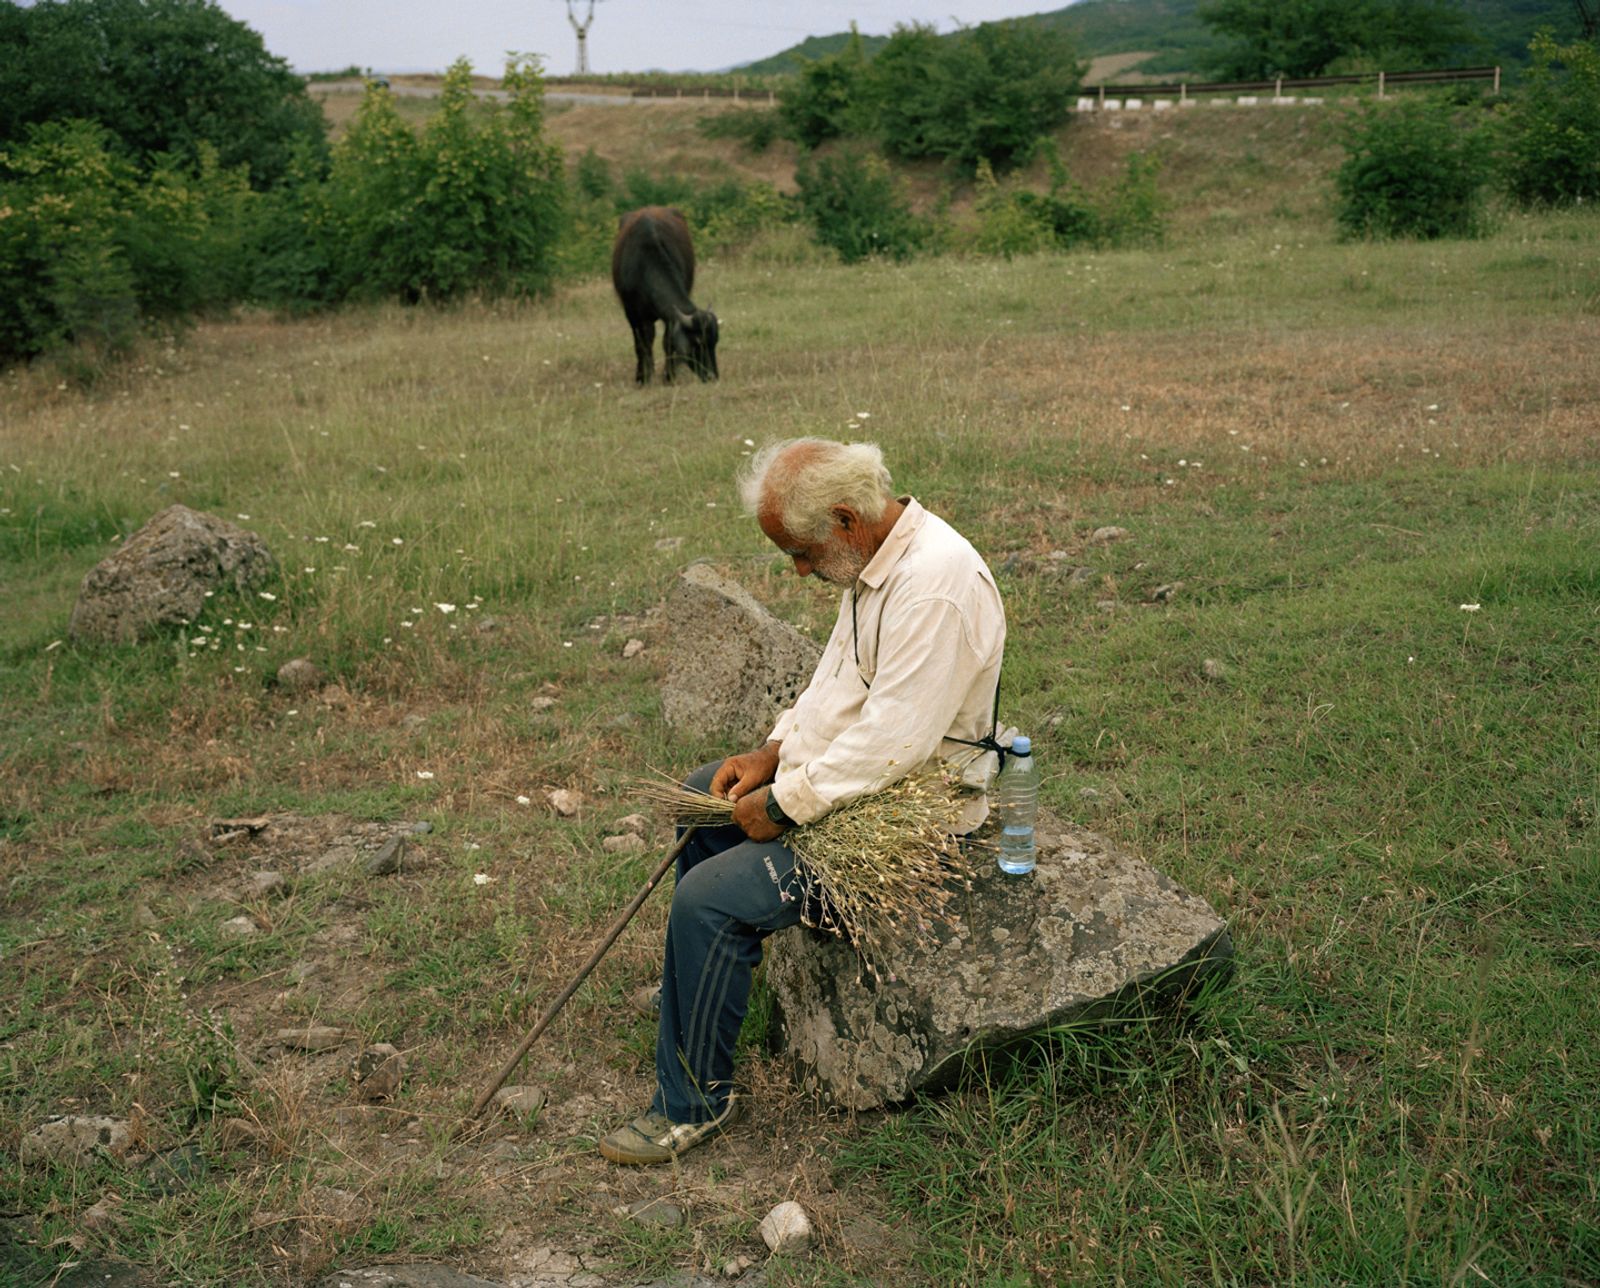 © Chloe Borkett - Image from the Georgia: in the Shadow of Europe photography project